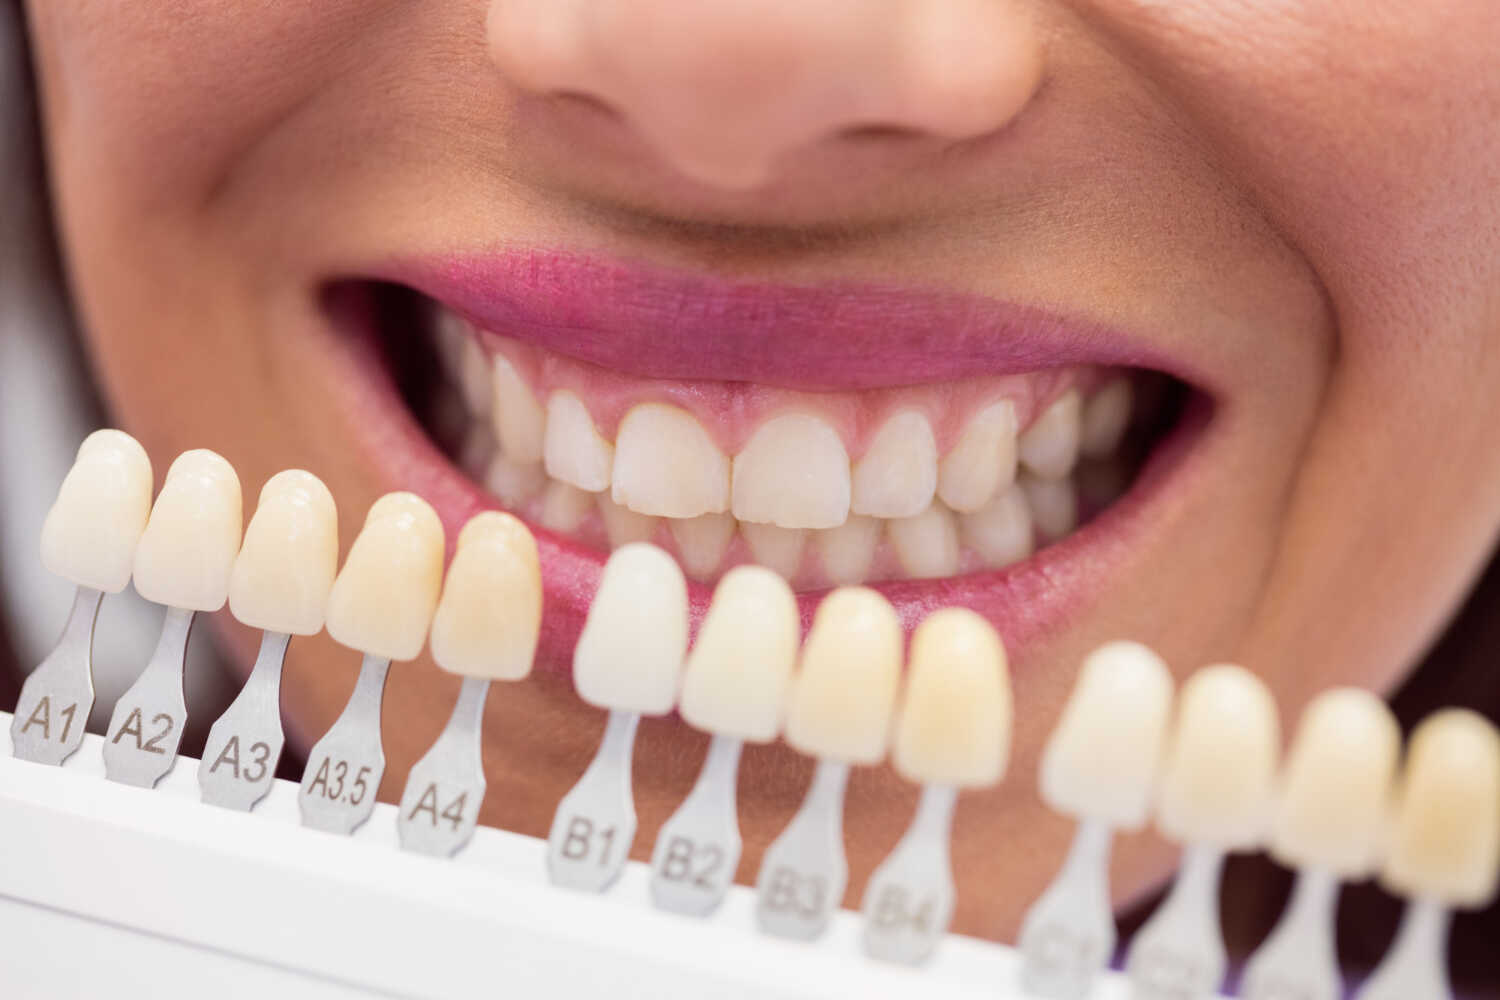 Teeth Whitening Damage Causes, Symptoms, and Treatment Options